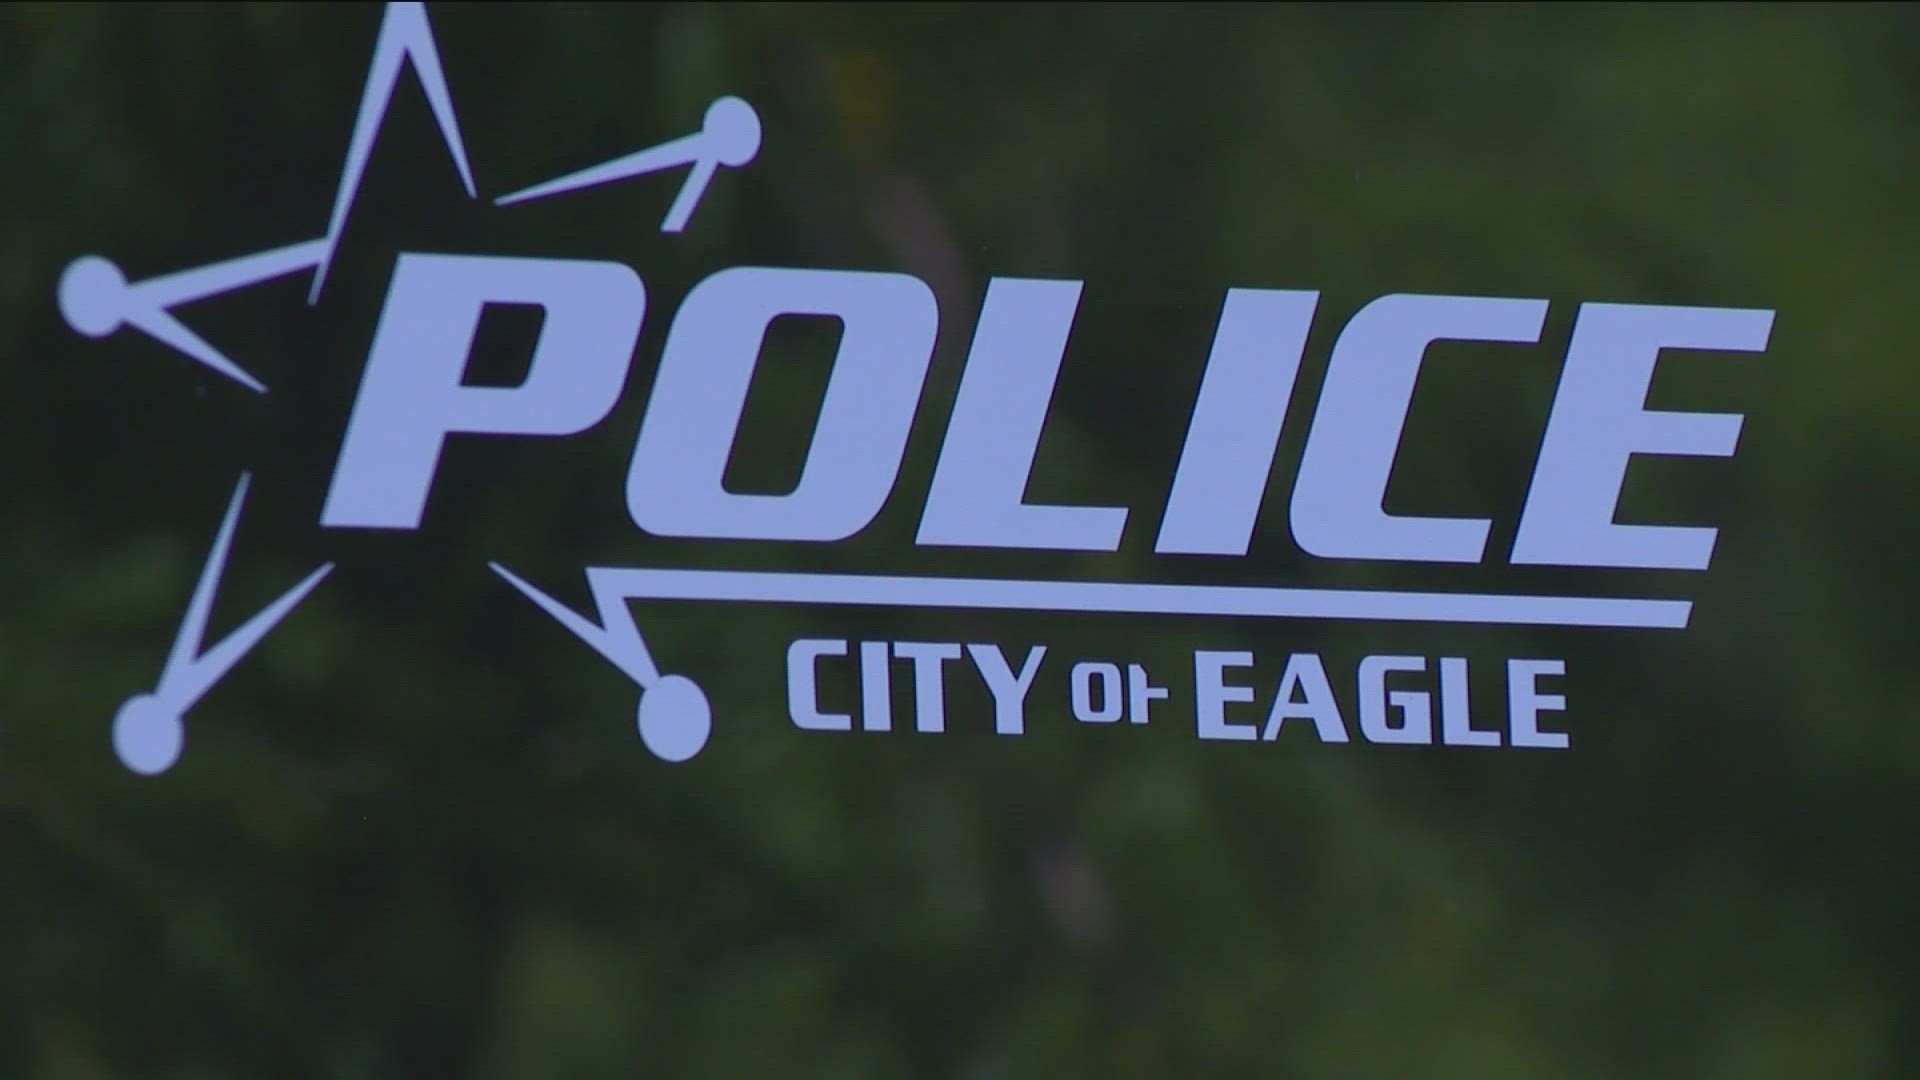 The Ada County Sheriff's Office says it needs $500,000 more to provide adequate services in Eagle.